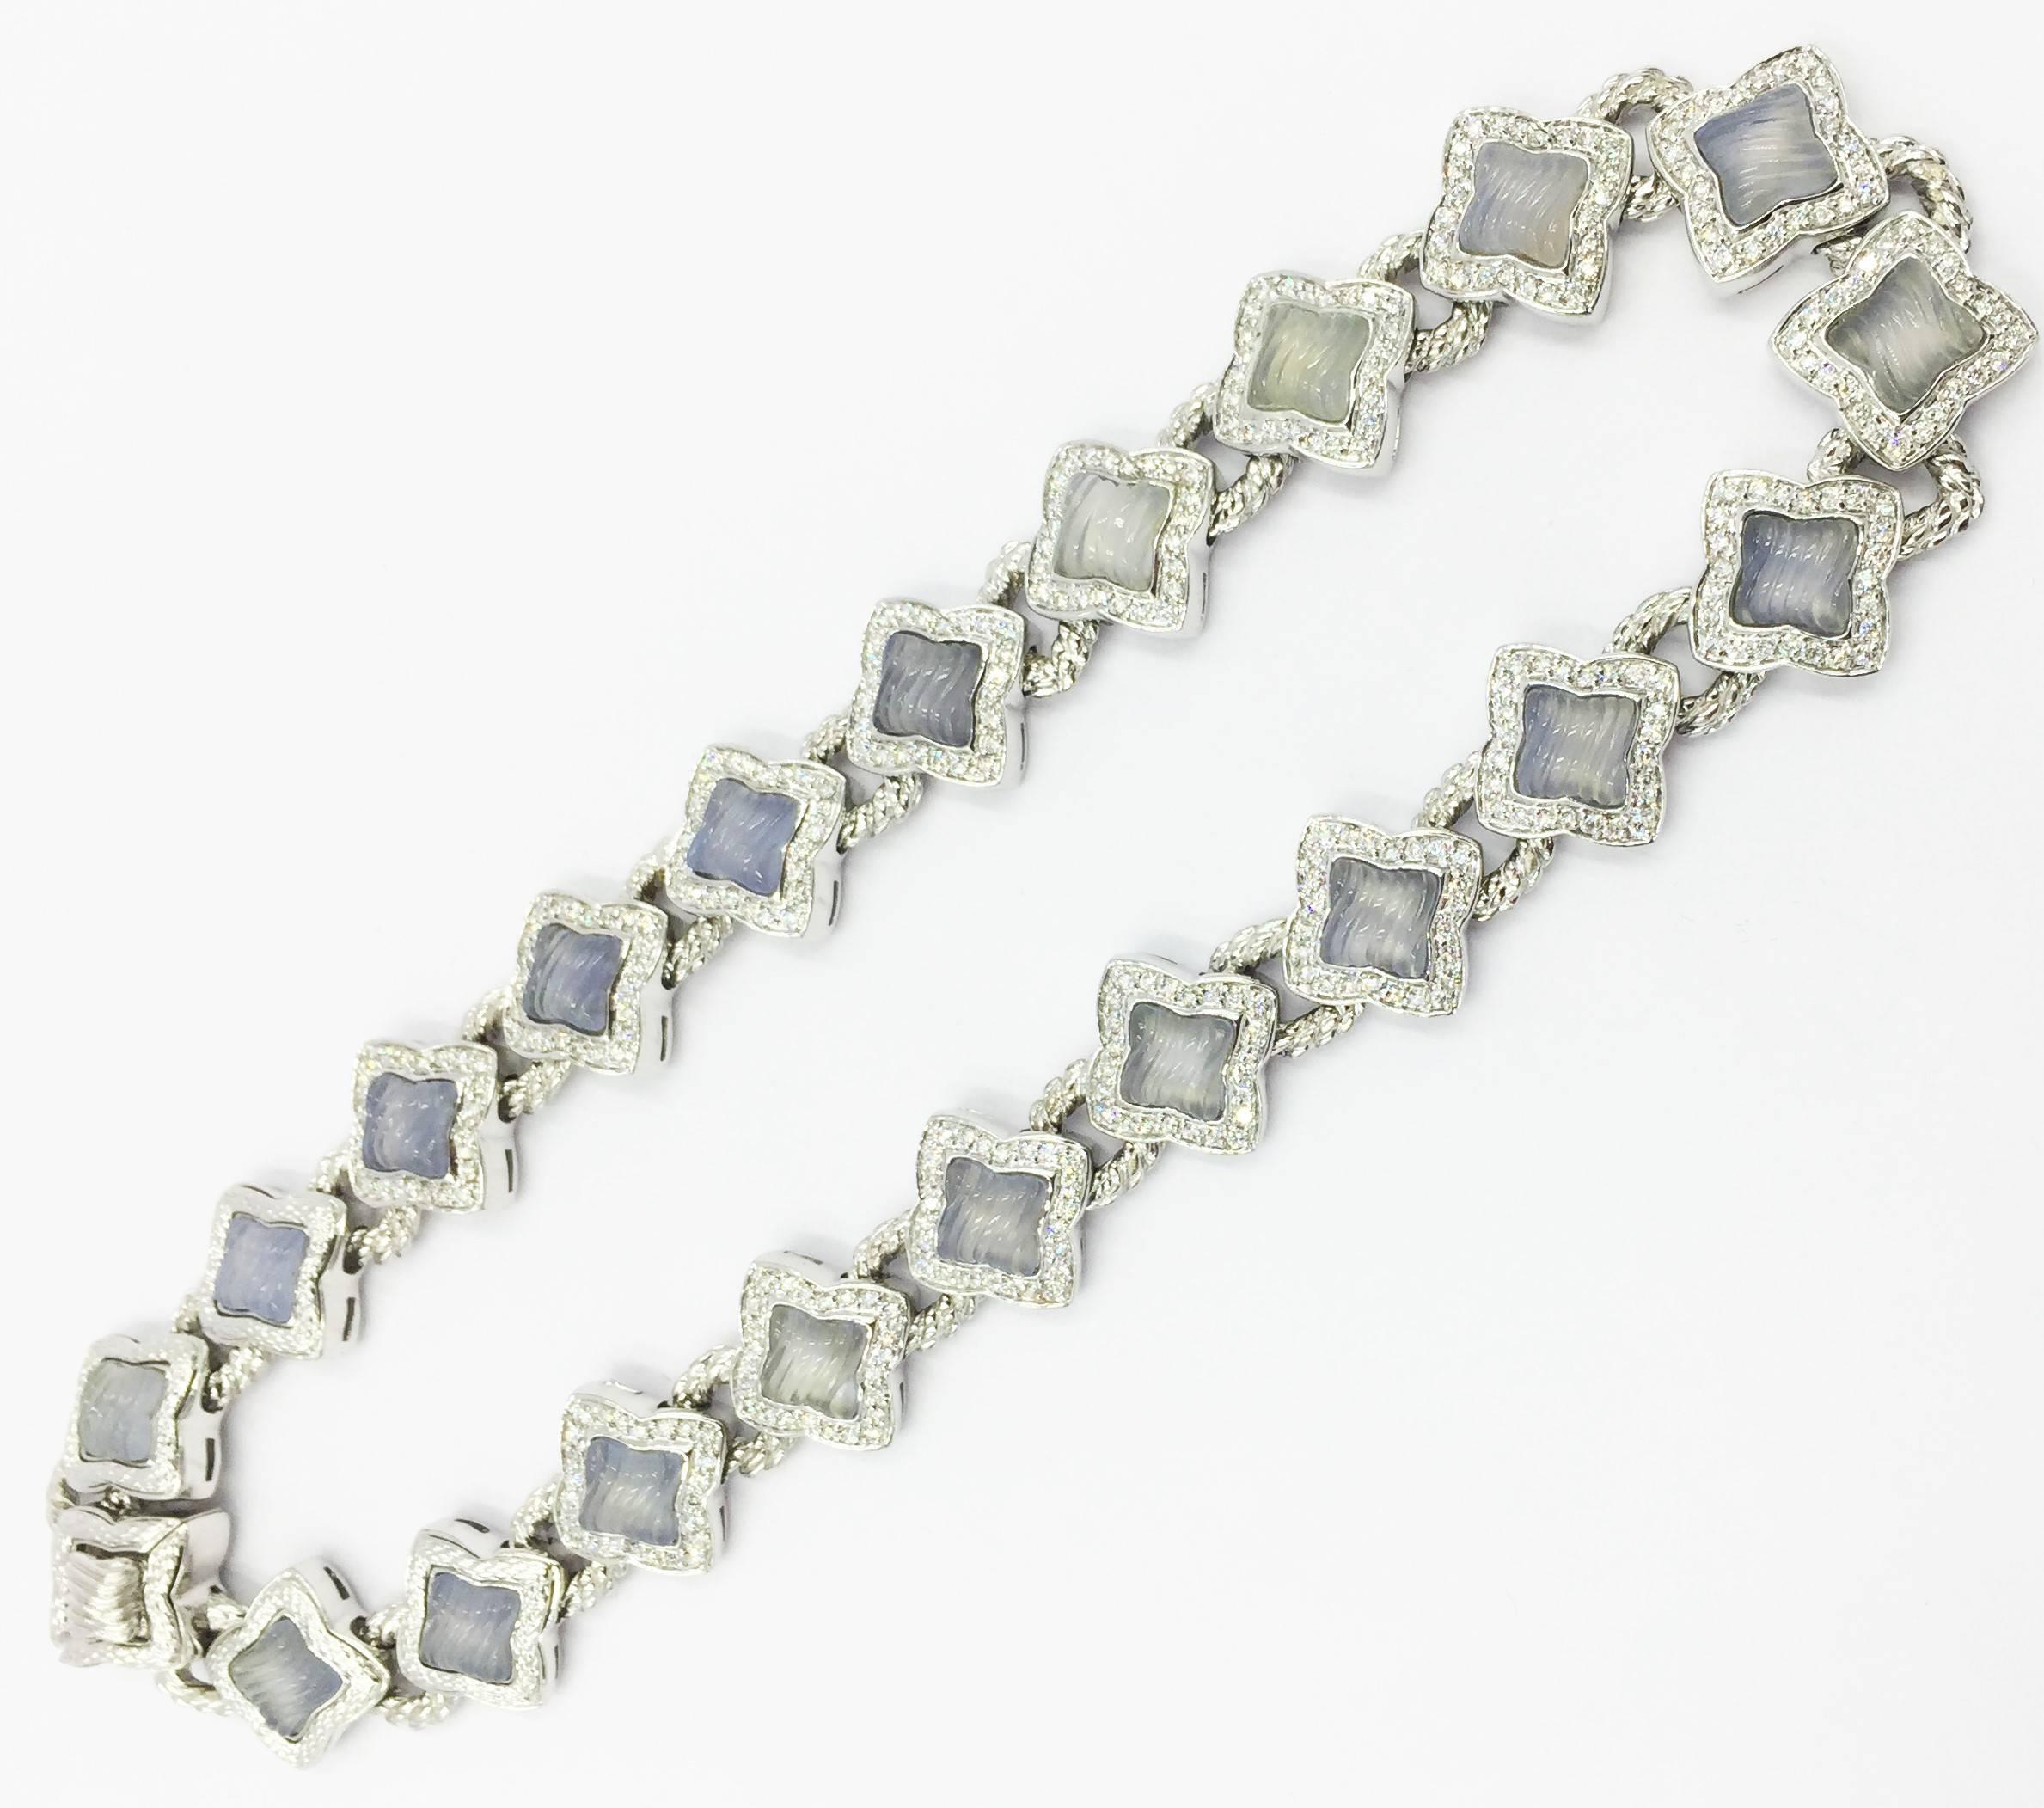 This Rare Signed David Yurman Chalcedony and 7 carats of Diamonds Quatrefoil Necklace is a one of a kind find and a must have for the rare David Yurman Collector. It measures 15 inches in length and weighs 121.3grams.

This necklace has been